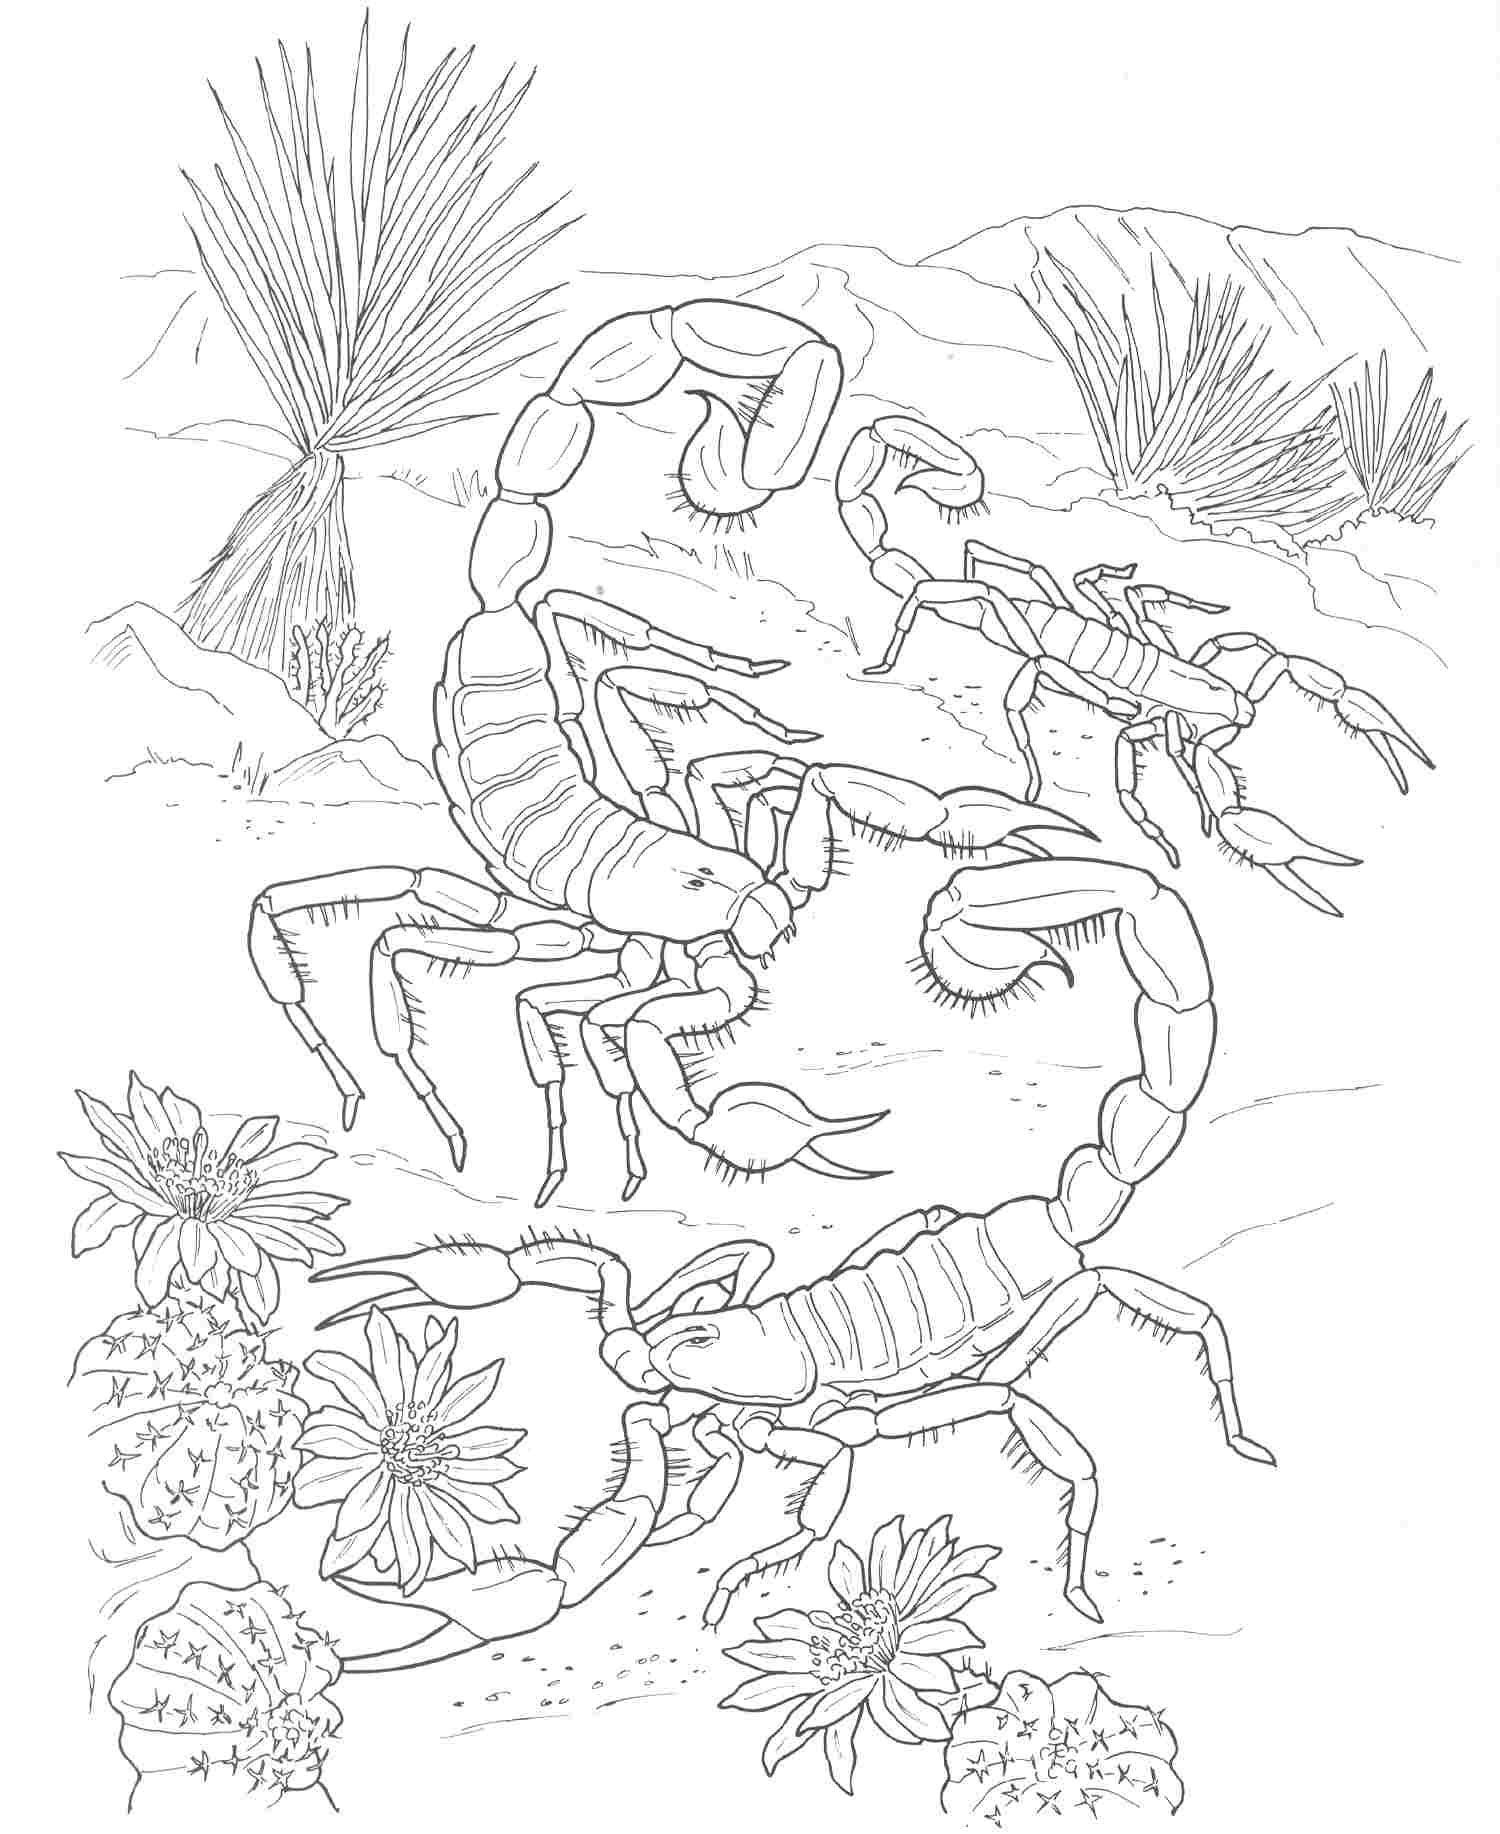 Coloring Page Of Dessert Animal - Coloring Pages For All Ages